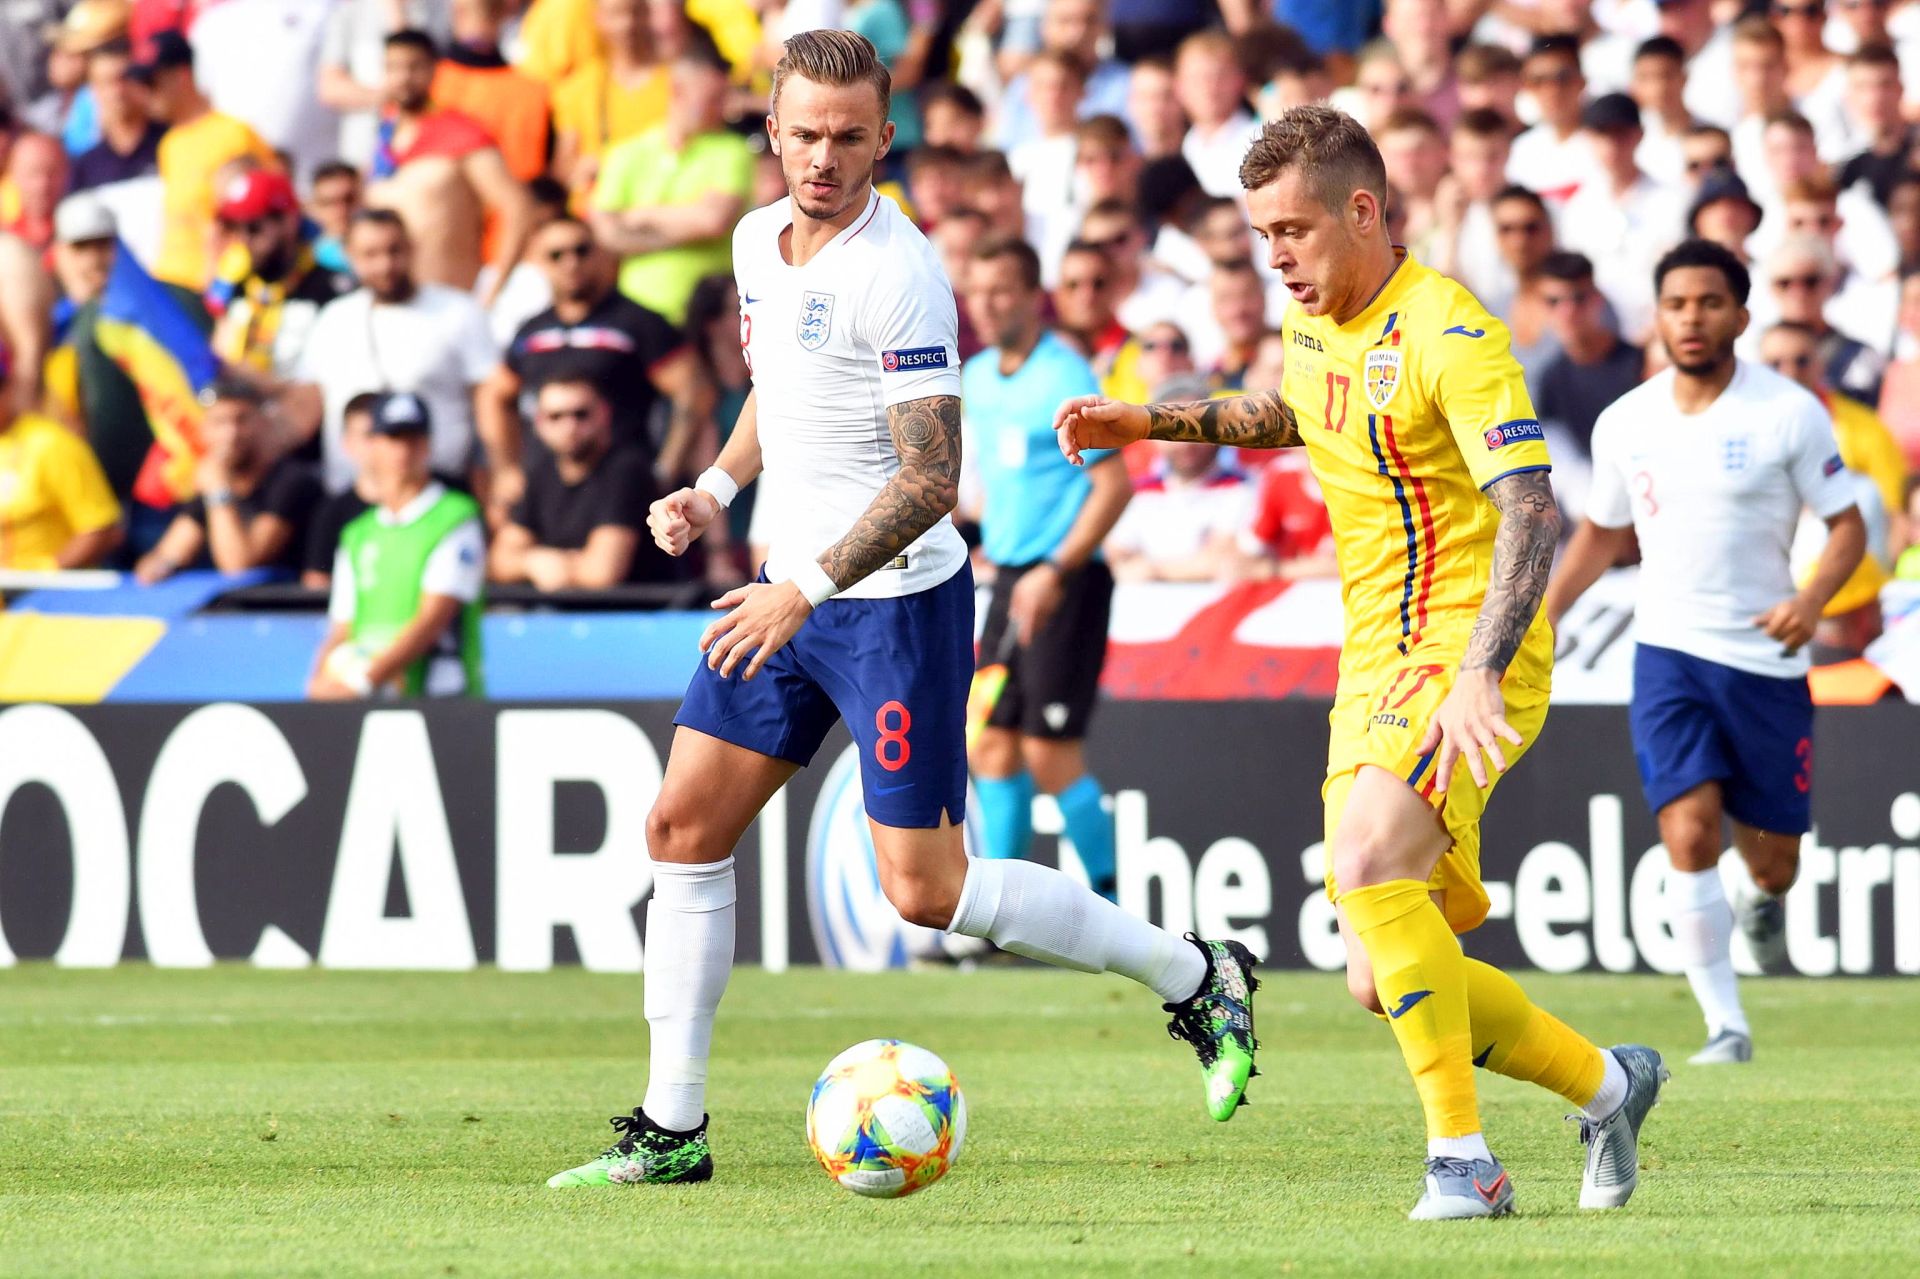 epa07664126 Alexandru Cicaldau (C) of Romania in action against James Maddison (L) of England during the UEFA European Under-21 Championship 2019 group C soccer match between England and Romania in Cesena, Italy, 21 June 2019.  EPA/ALESSIO TARPINI